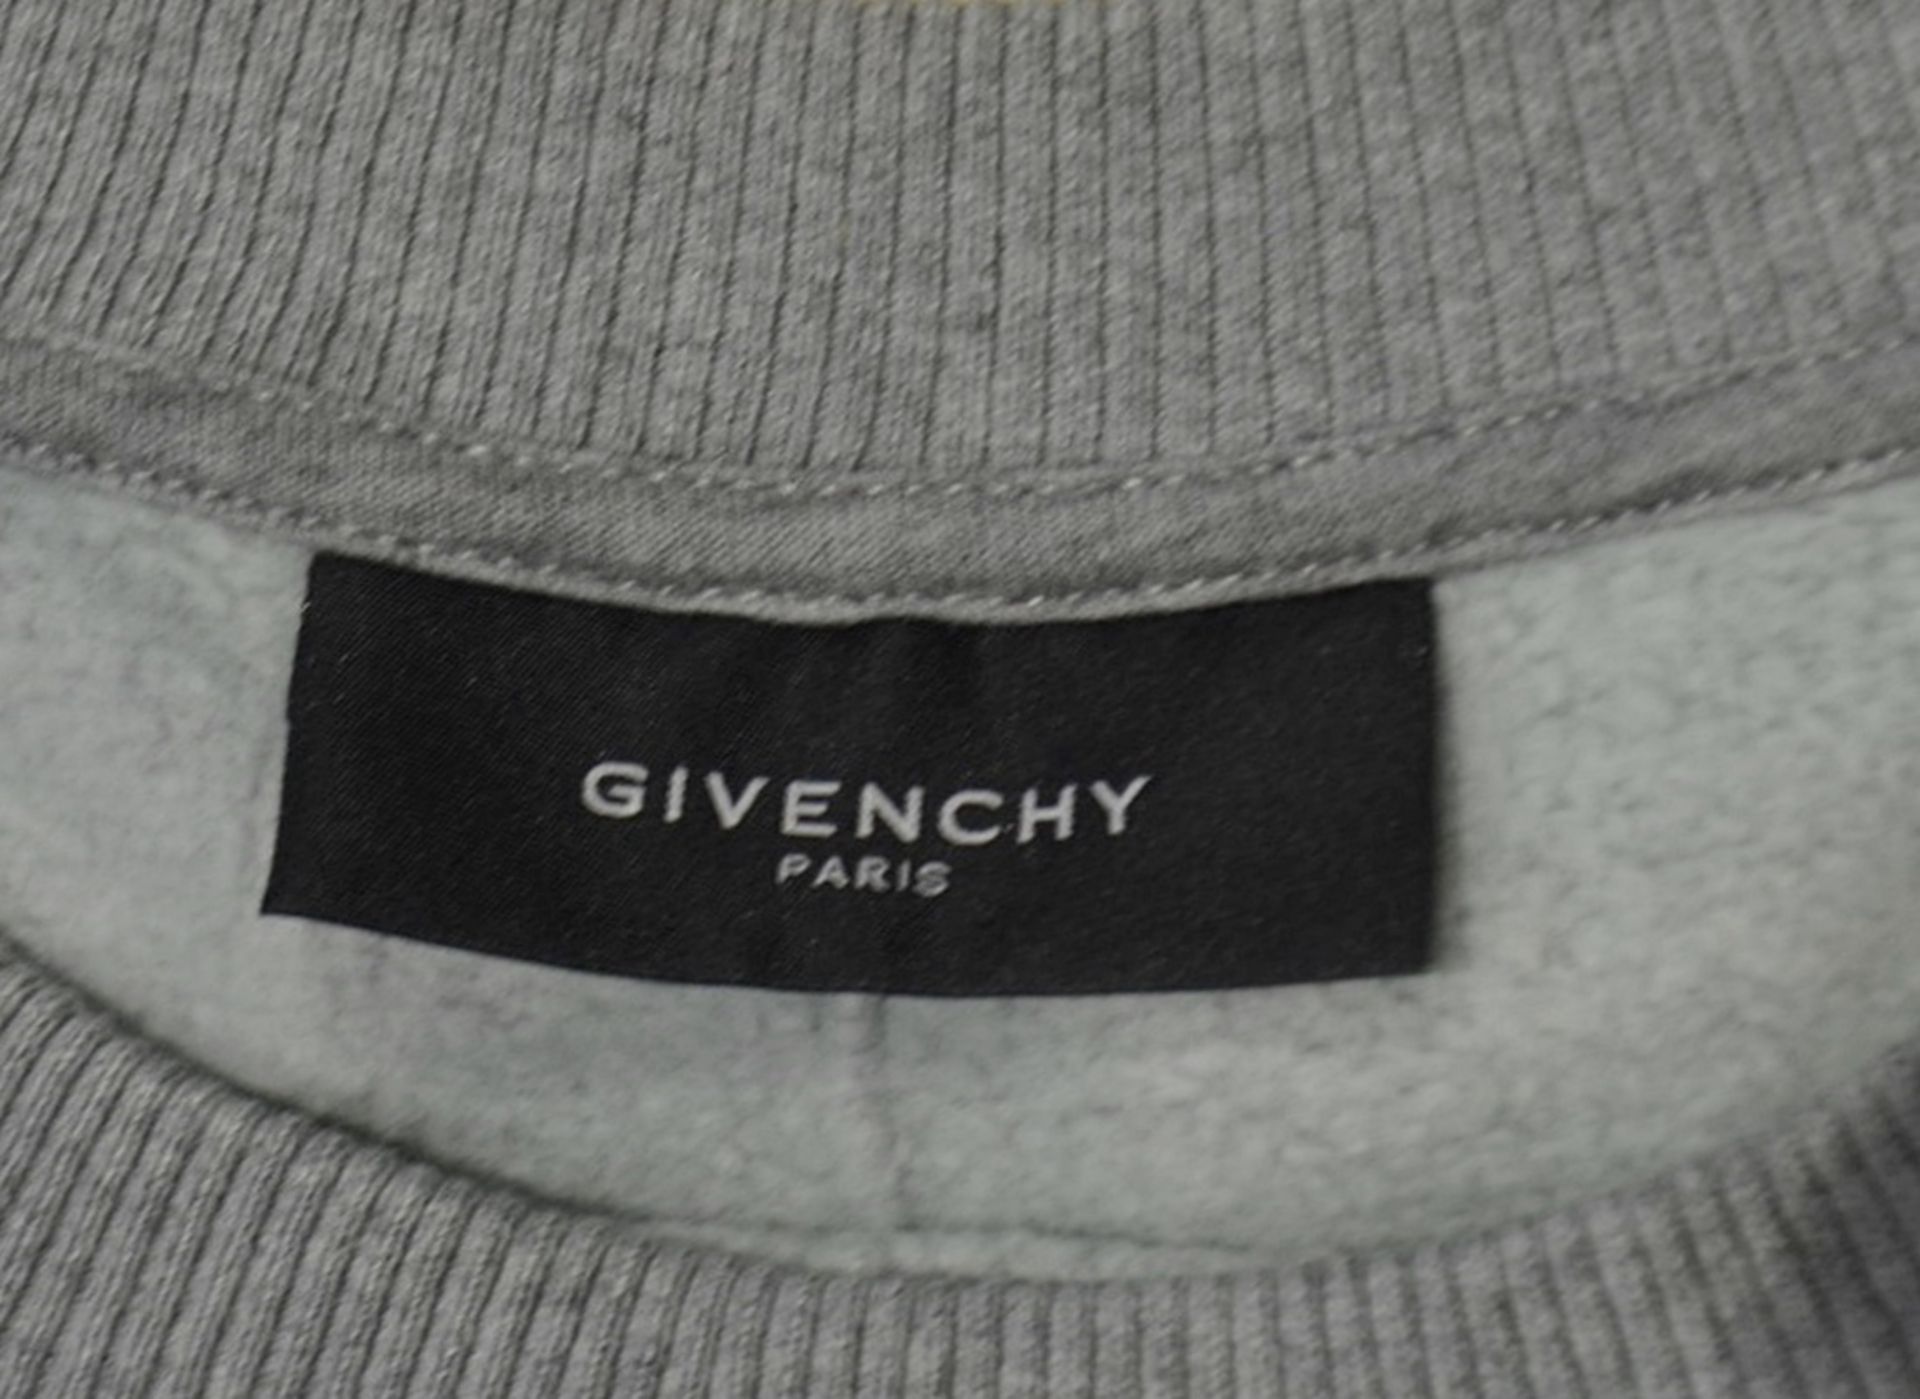 1 x Men's Genuine Givenchy Sweatshirt In Grey With Lambskin Panel On Front With Embroidered Border - Image 2 of 9